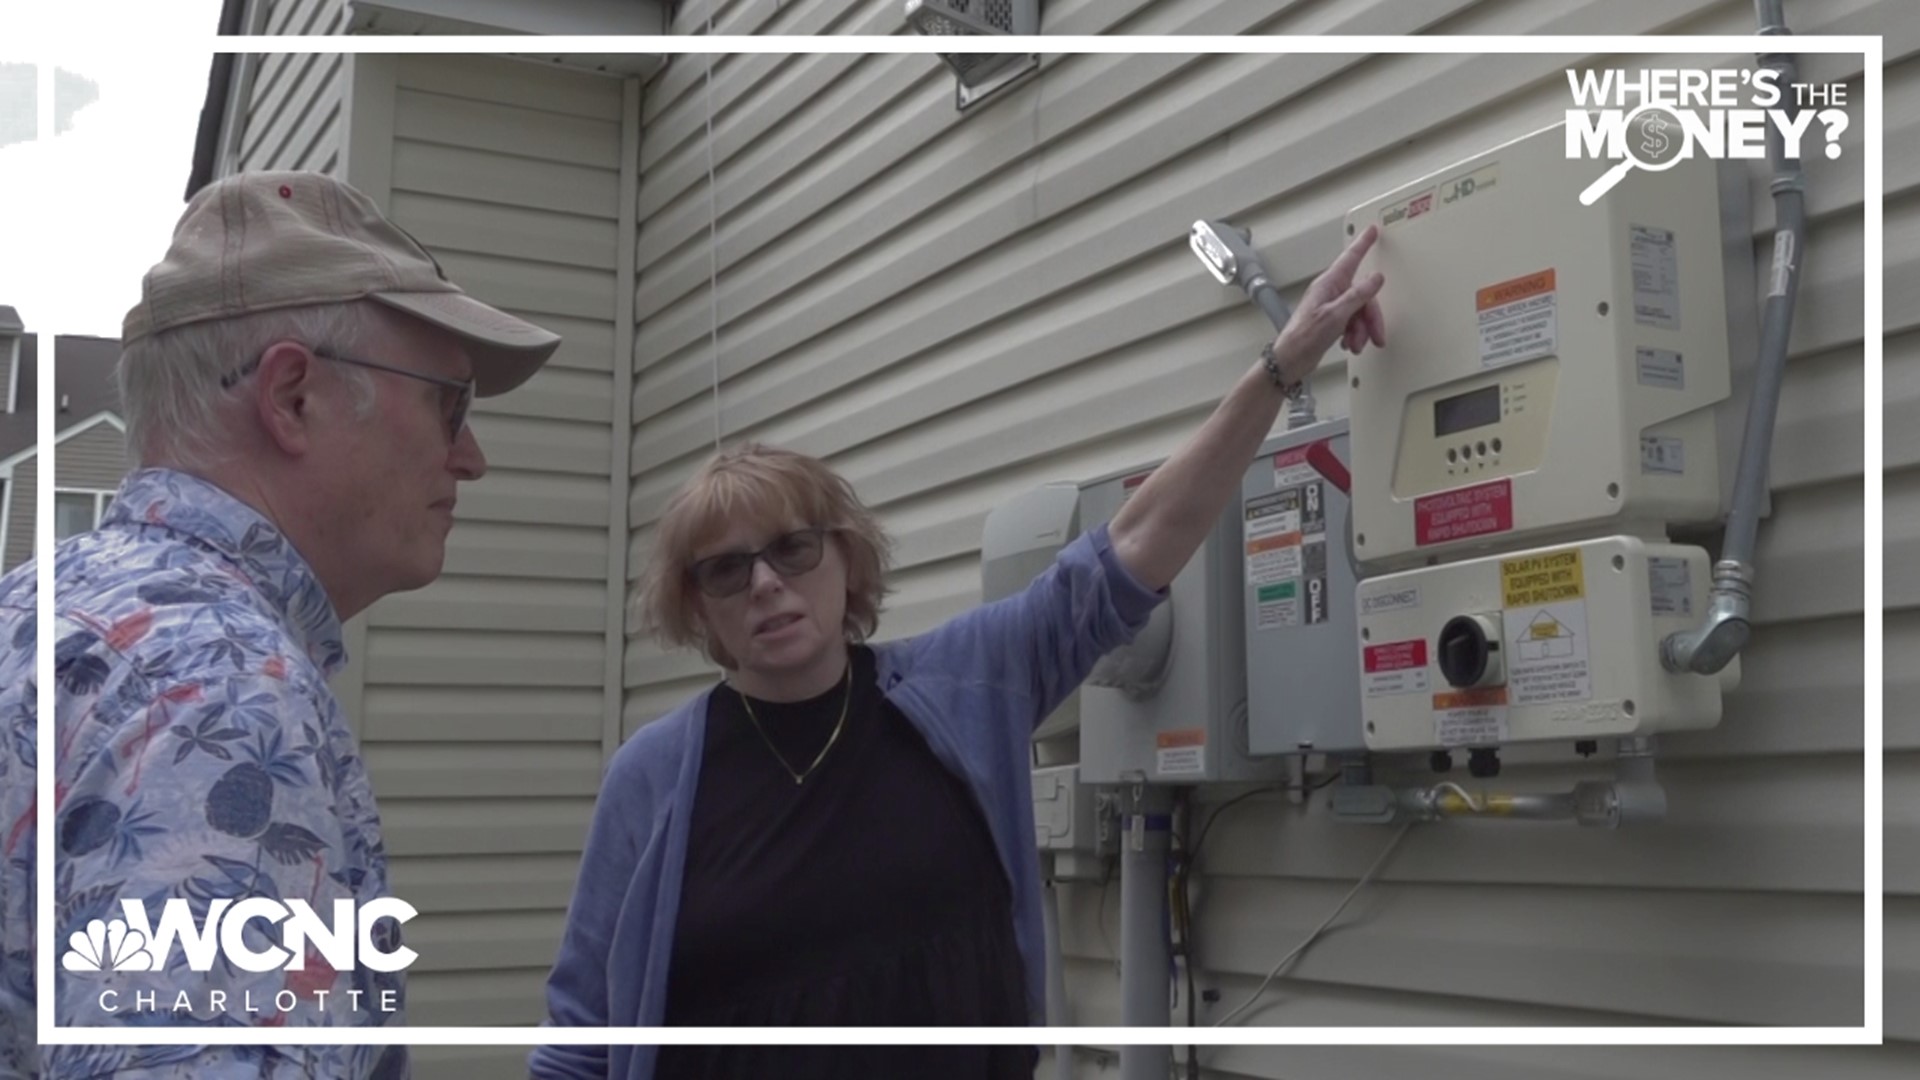 "I had nowhere else to turn," Jay Lee explained to WCNC Charlotte's Kayland Hagwood when the solar panels failed and the company stopped responding.